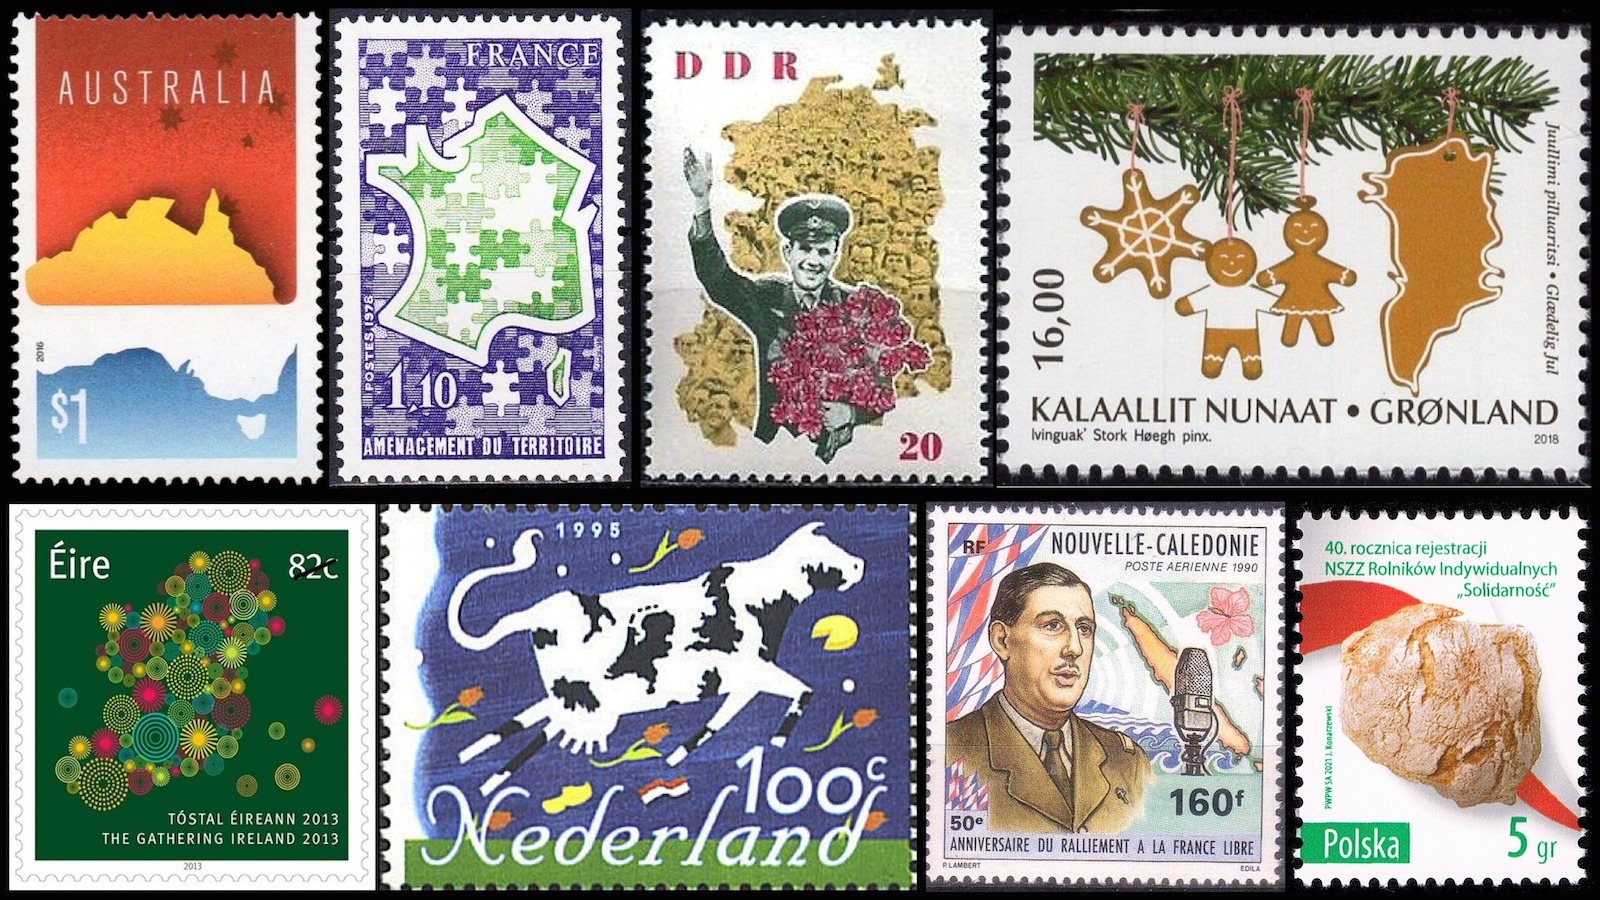 What's better than maps or stamps? Maps on stamps! - Big Think